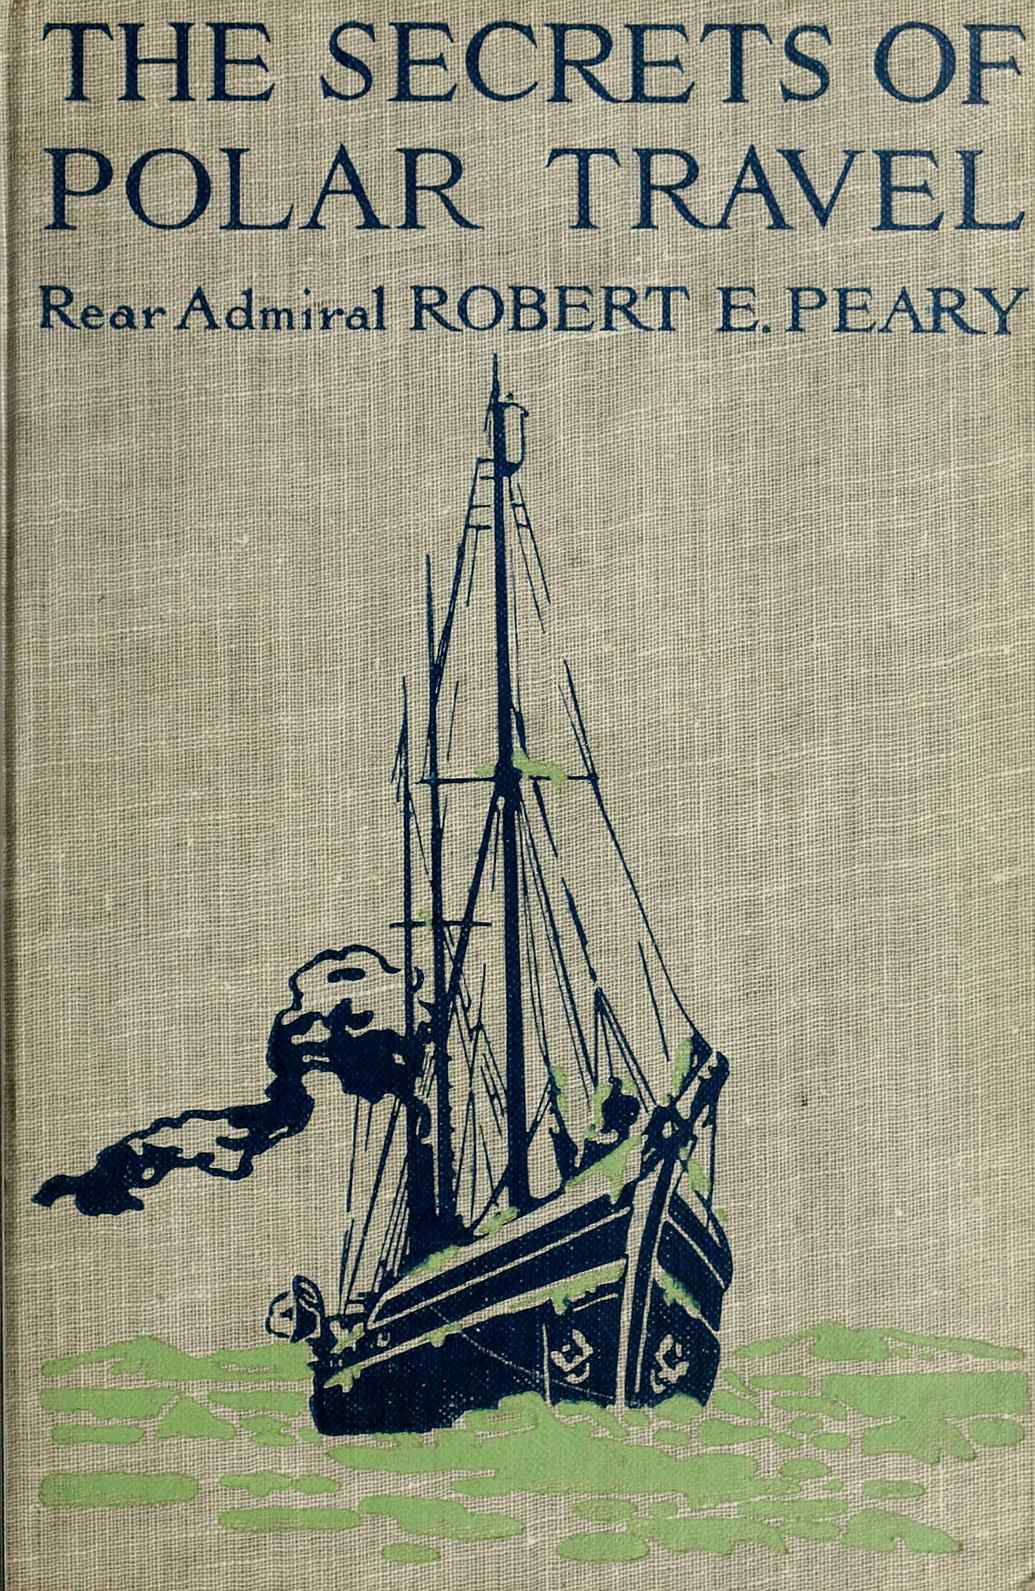 Peary's Arctic Quest: Untold Stories from Robert E. Peary's North Pole –  The Bowdoin Store